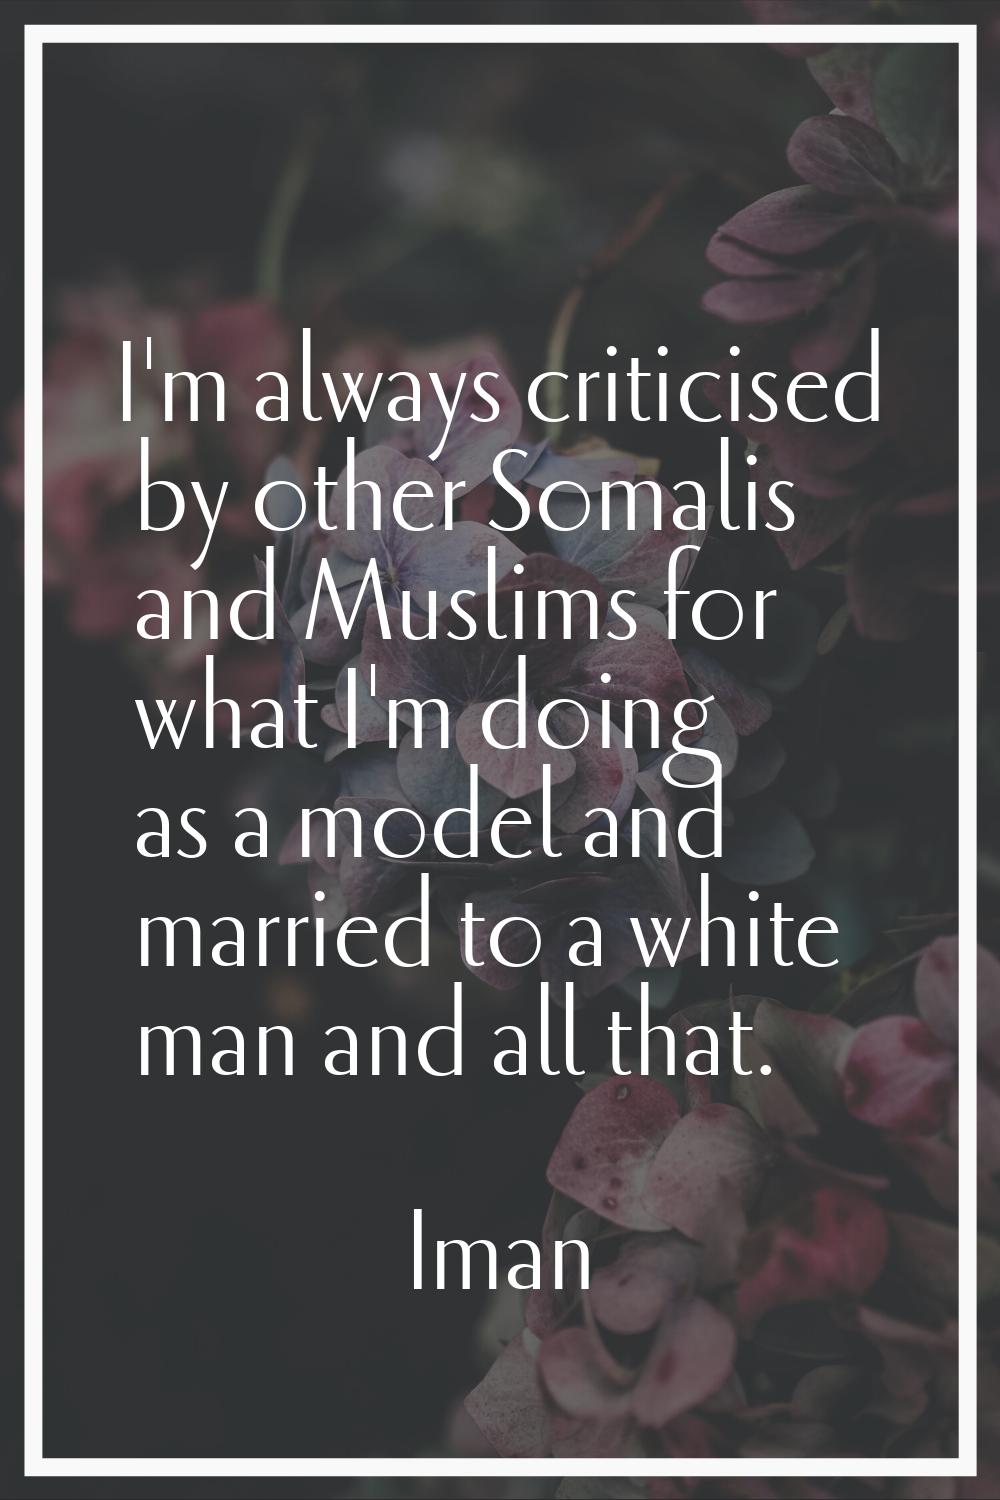 I'm always criticised by other Somalis and Muslims for what I'm doing as a model and married to a w